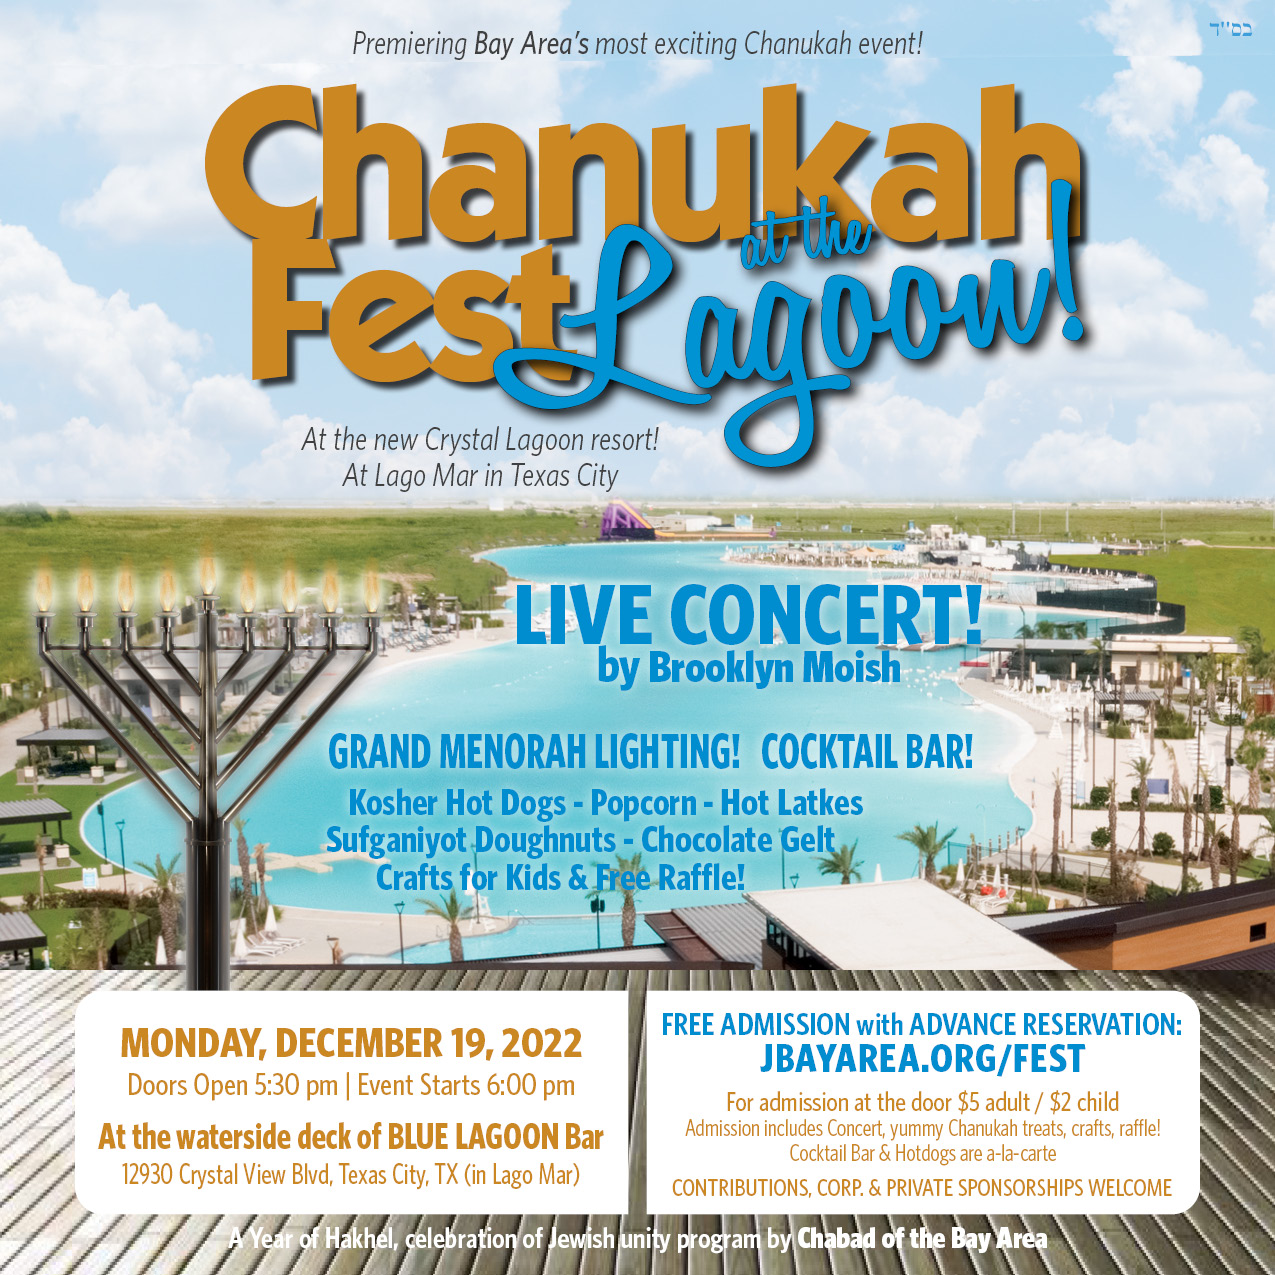 ChanukahFest at the Lagoon - Monday, Dec. 19, 2022 - At Waterside Deck of BLUE LAGOON Bar in Lago Mar, Texas City, TX